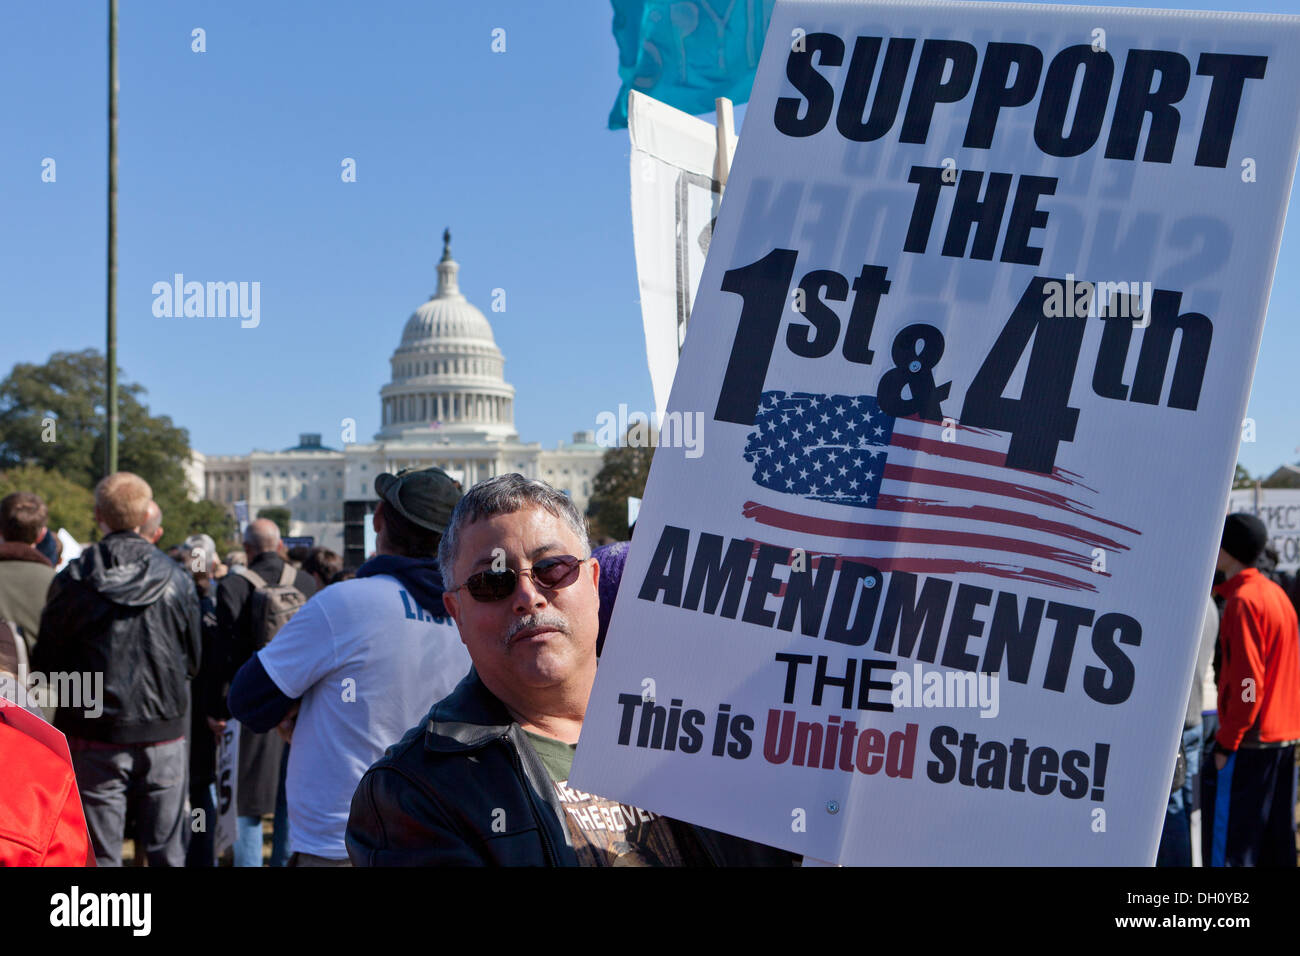 US citizens and many public advocacy organizations gather to rally on Capitol Hill against NSA spying - Washington, DC USA Stock Photo